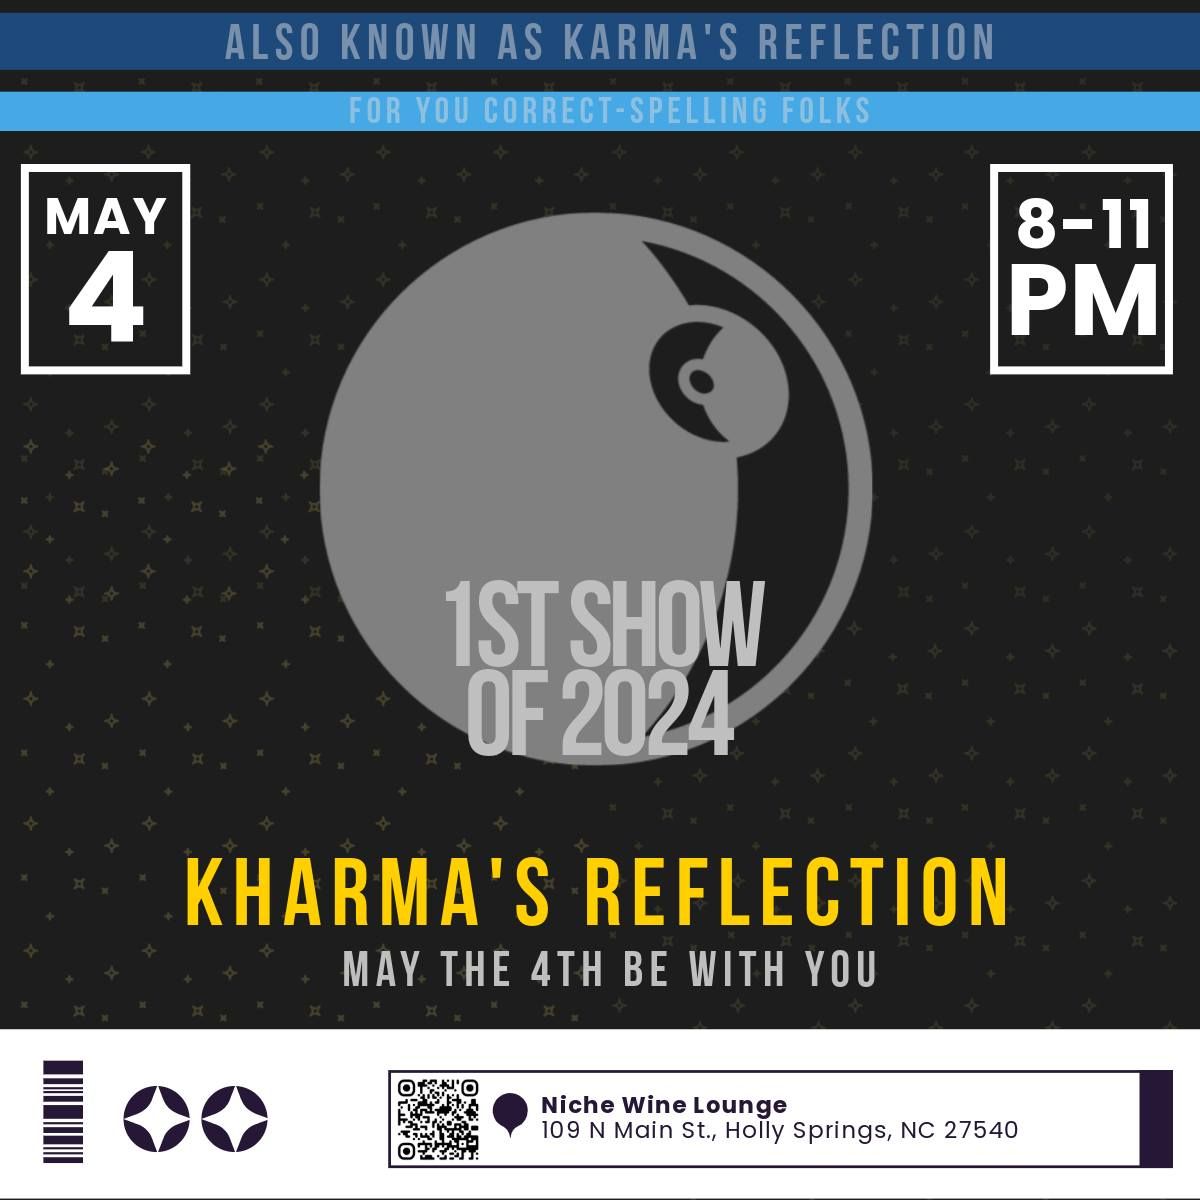 May the 4th Be With You - with great wine and Kharma's Reflection